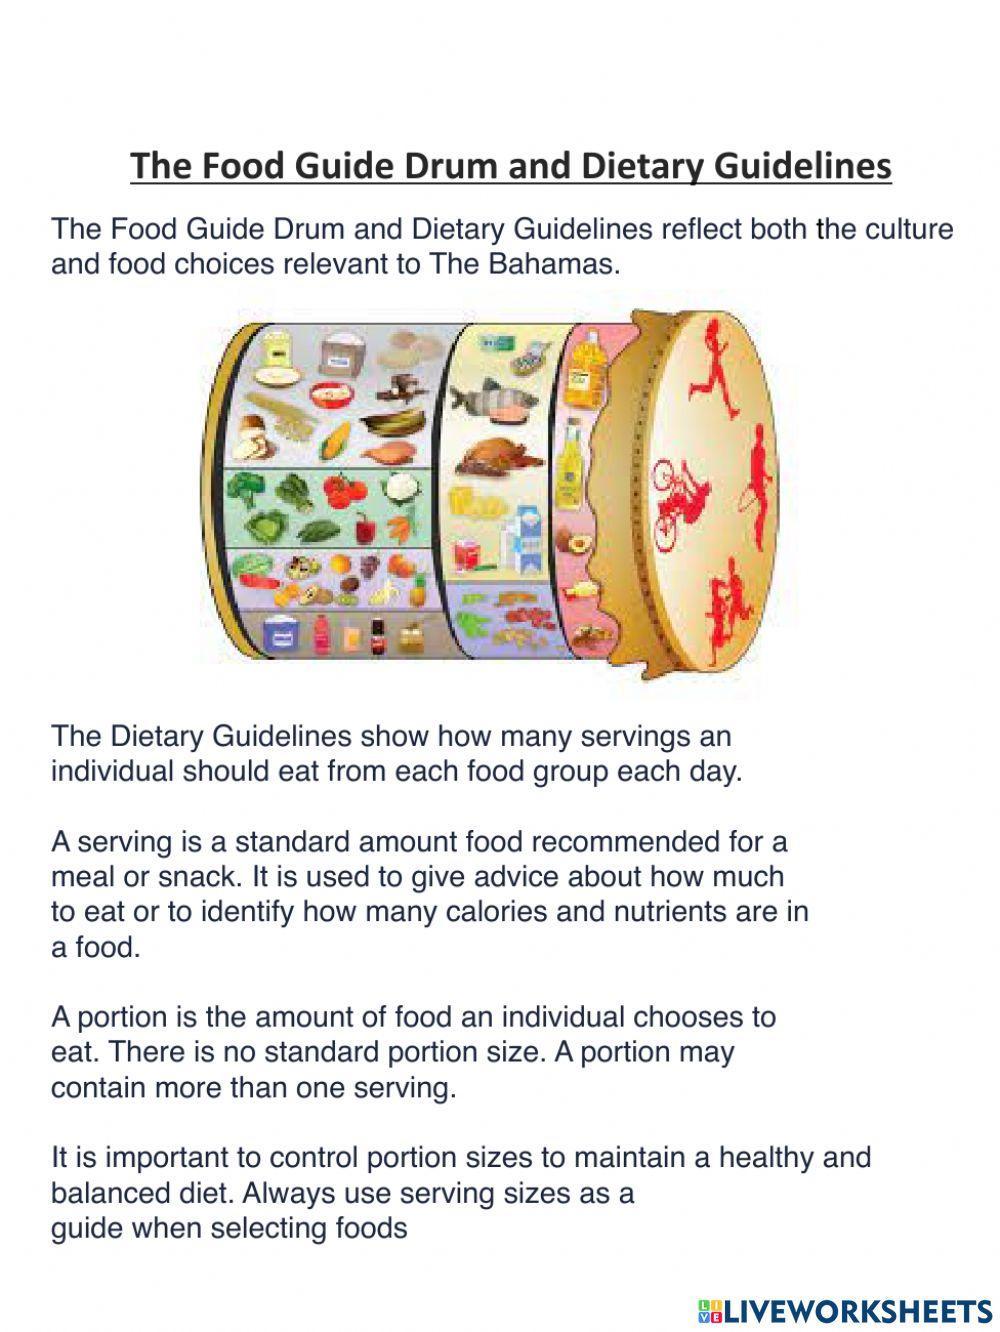 The Food Drum (Notes)